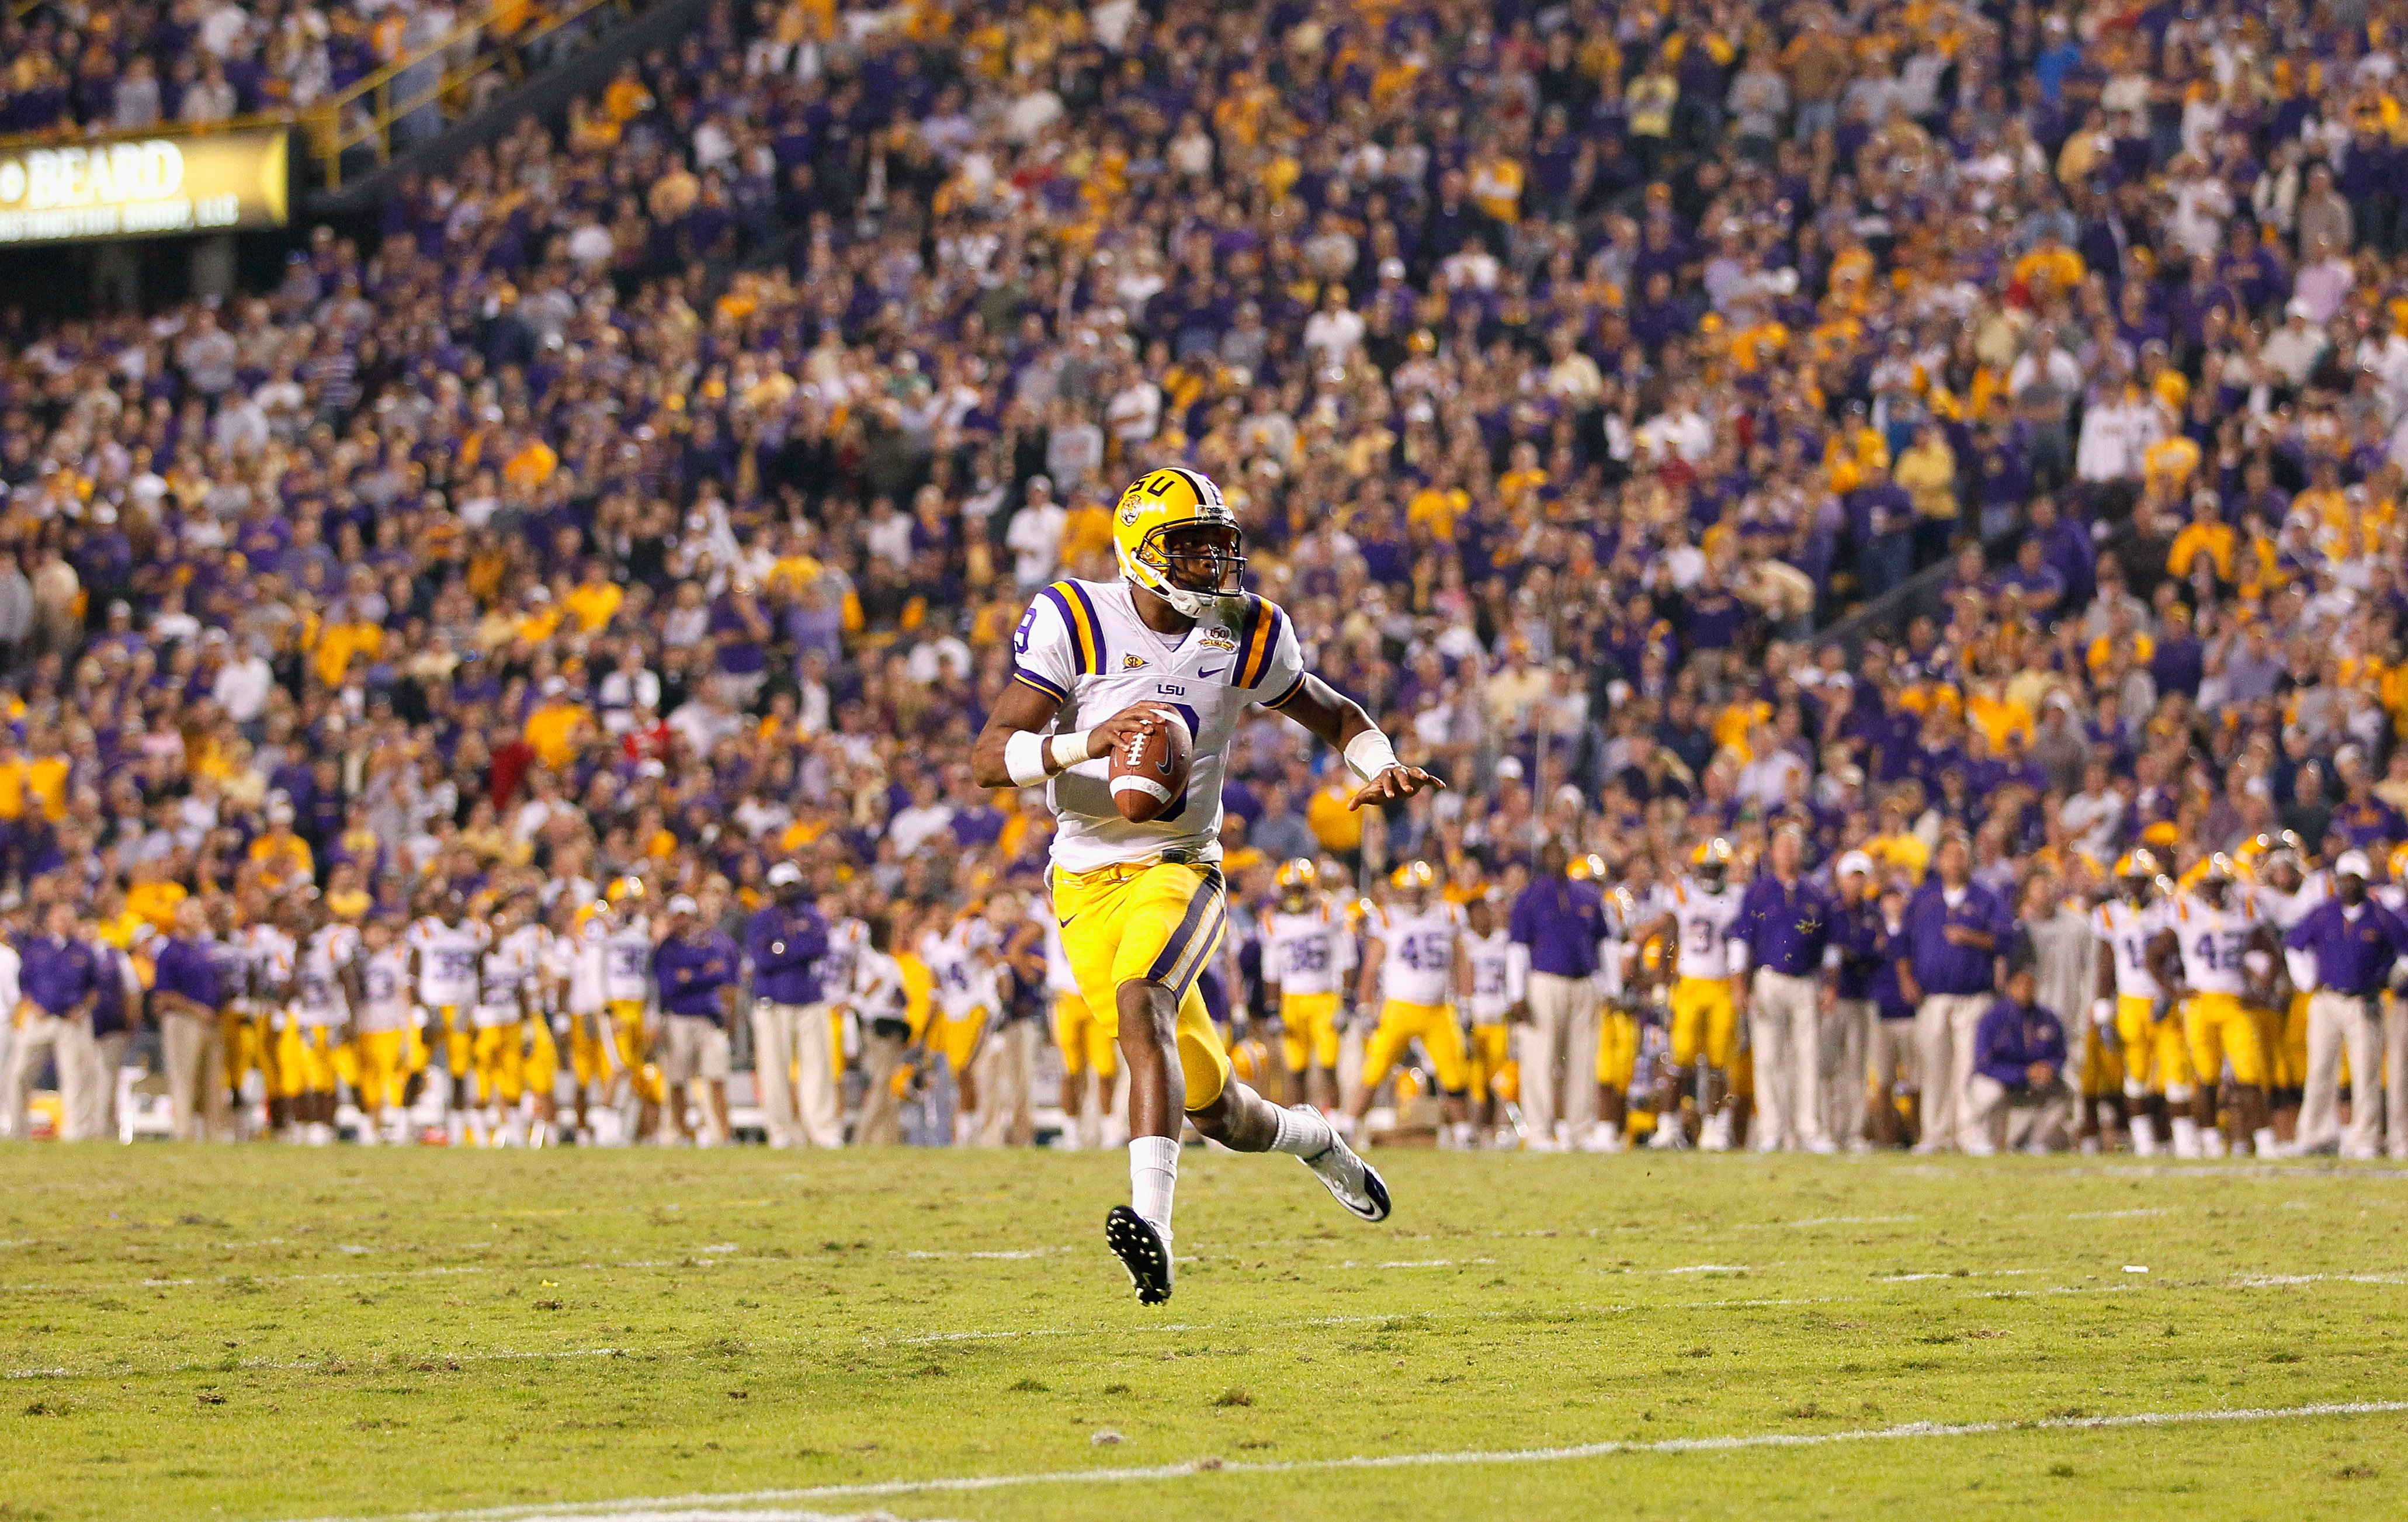 BATON ROUGE, LA - NOVEMBER 20:  Quarterback Jordan Jefferson #9 of the Louisiana State University Tigers rushes out of the pocket against the Ole Miss Rebels at Tiger Stadium on November 20, 2010 in Baton Rouge, Louisiana.  (Photo by Kevin C. Cox/Getty Im